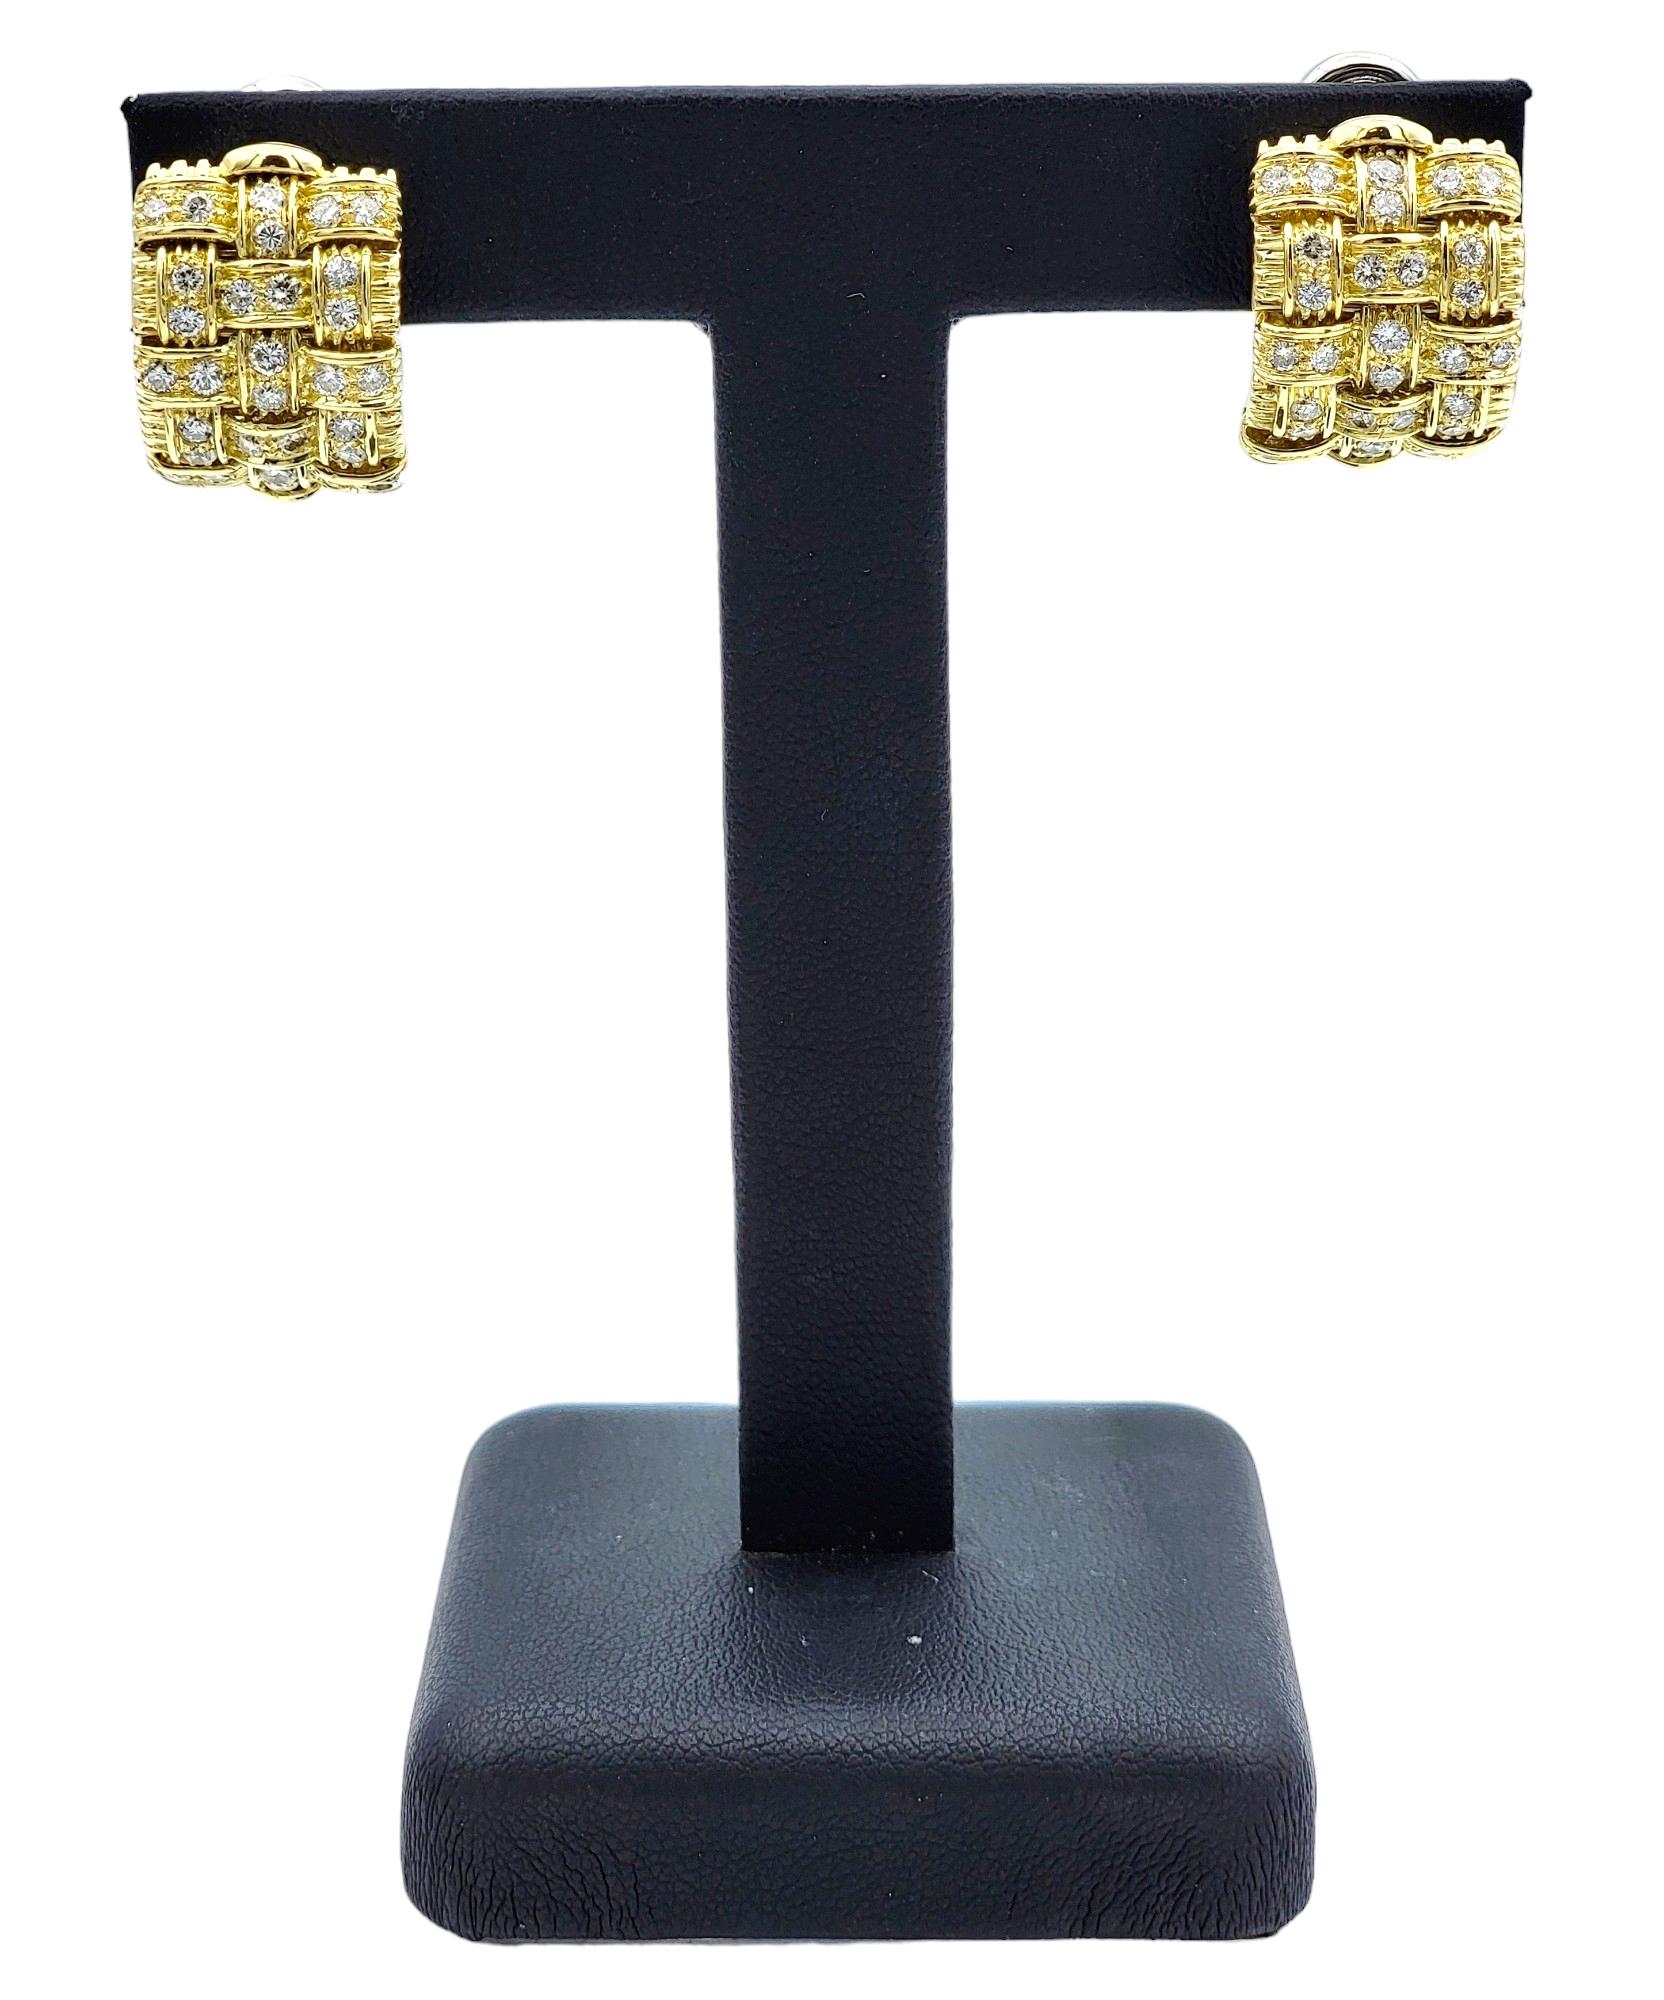 Roberto Coin Appassionata Woven Omega Back Earrings with Diamonds 18 Karat Gold For Sale 6